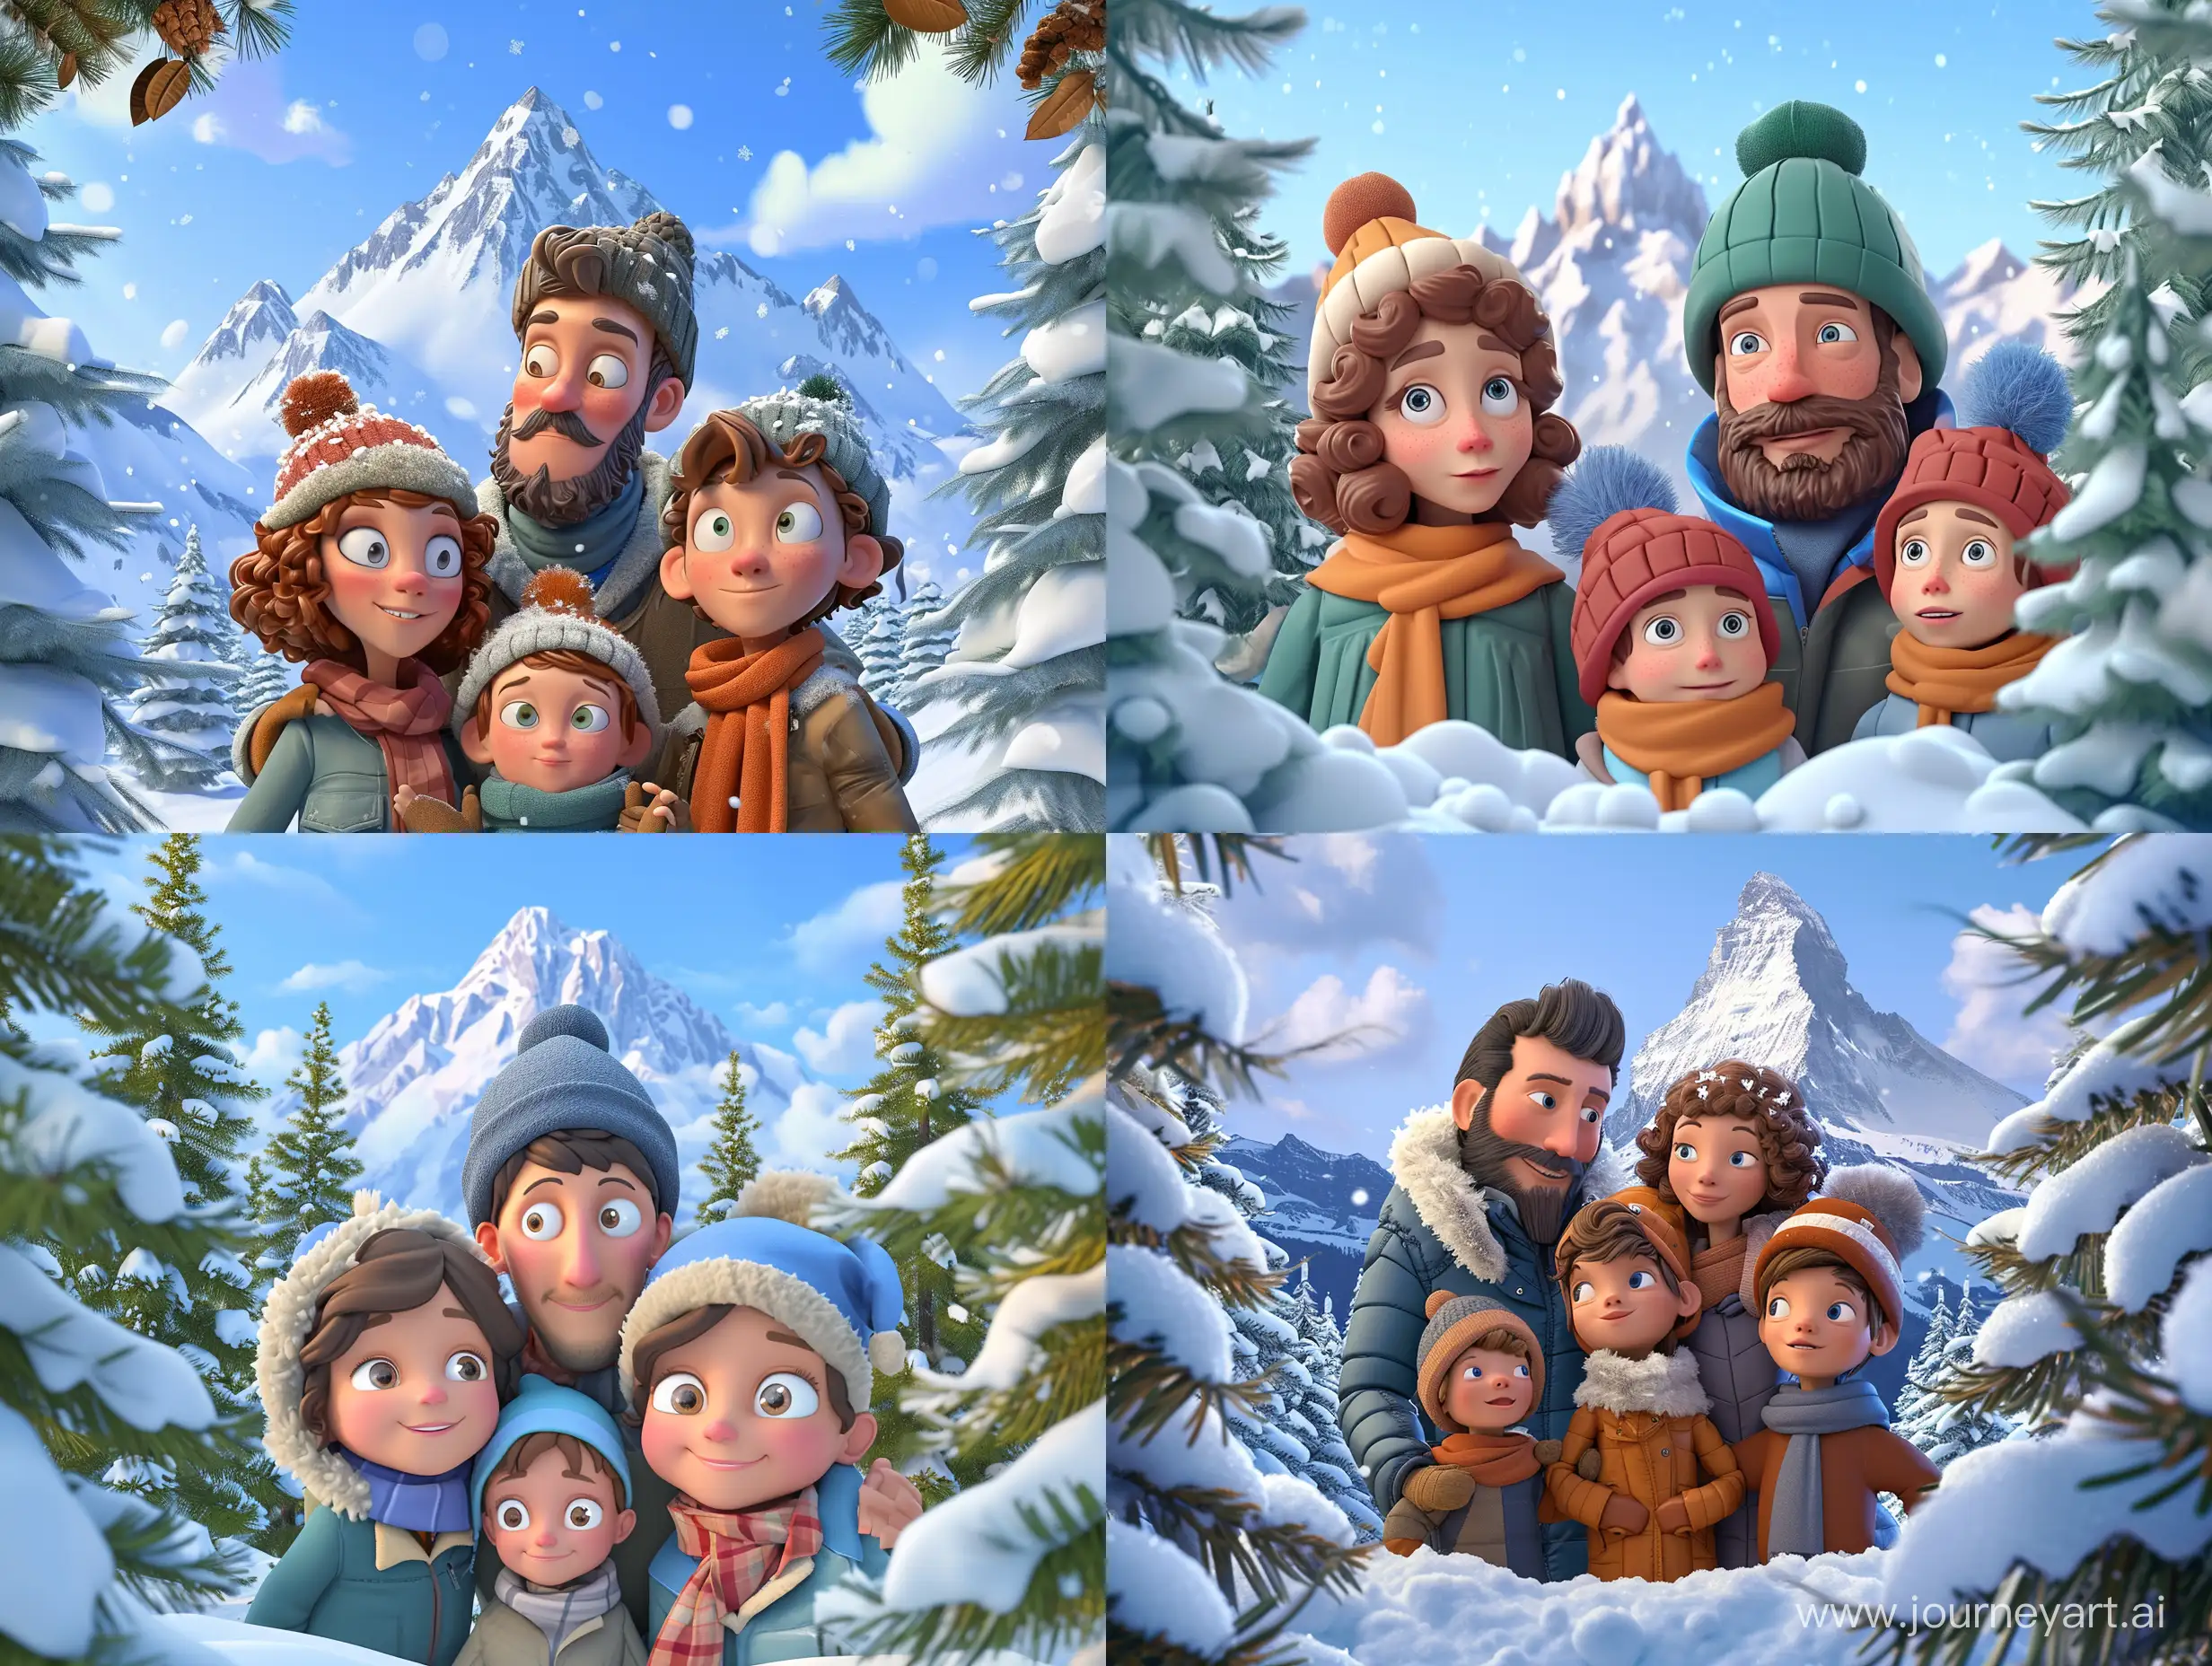 Winter-Family-Adventure-3D-Style-Scene-with-Snowy-Mountain-Backdrop